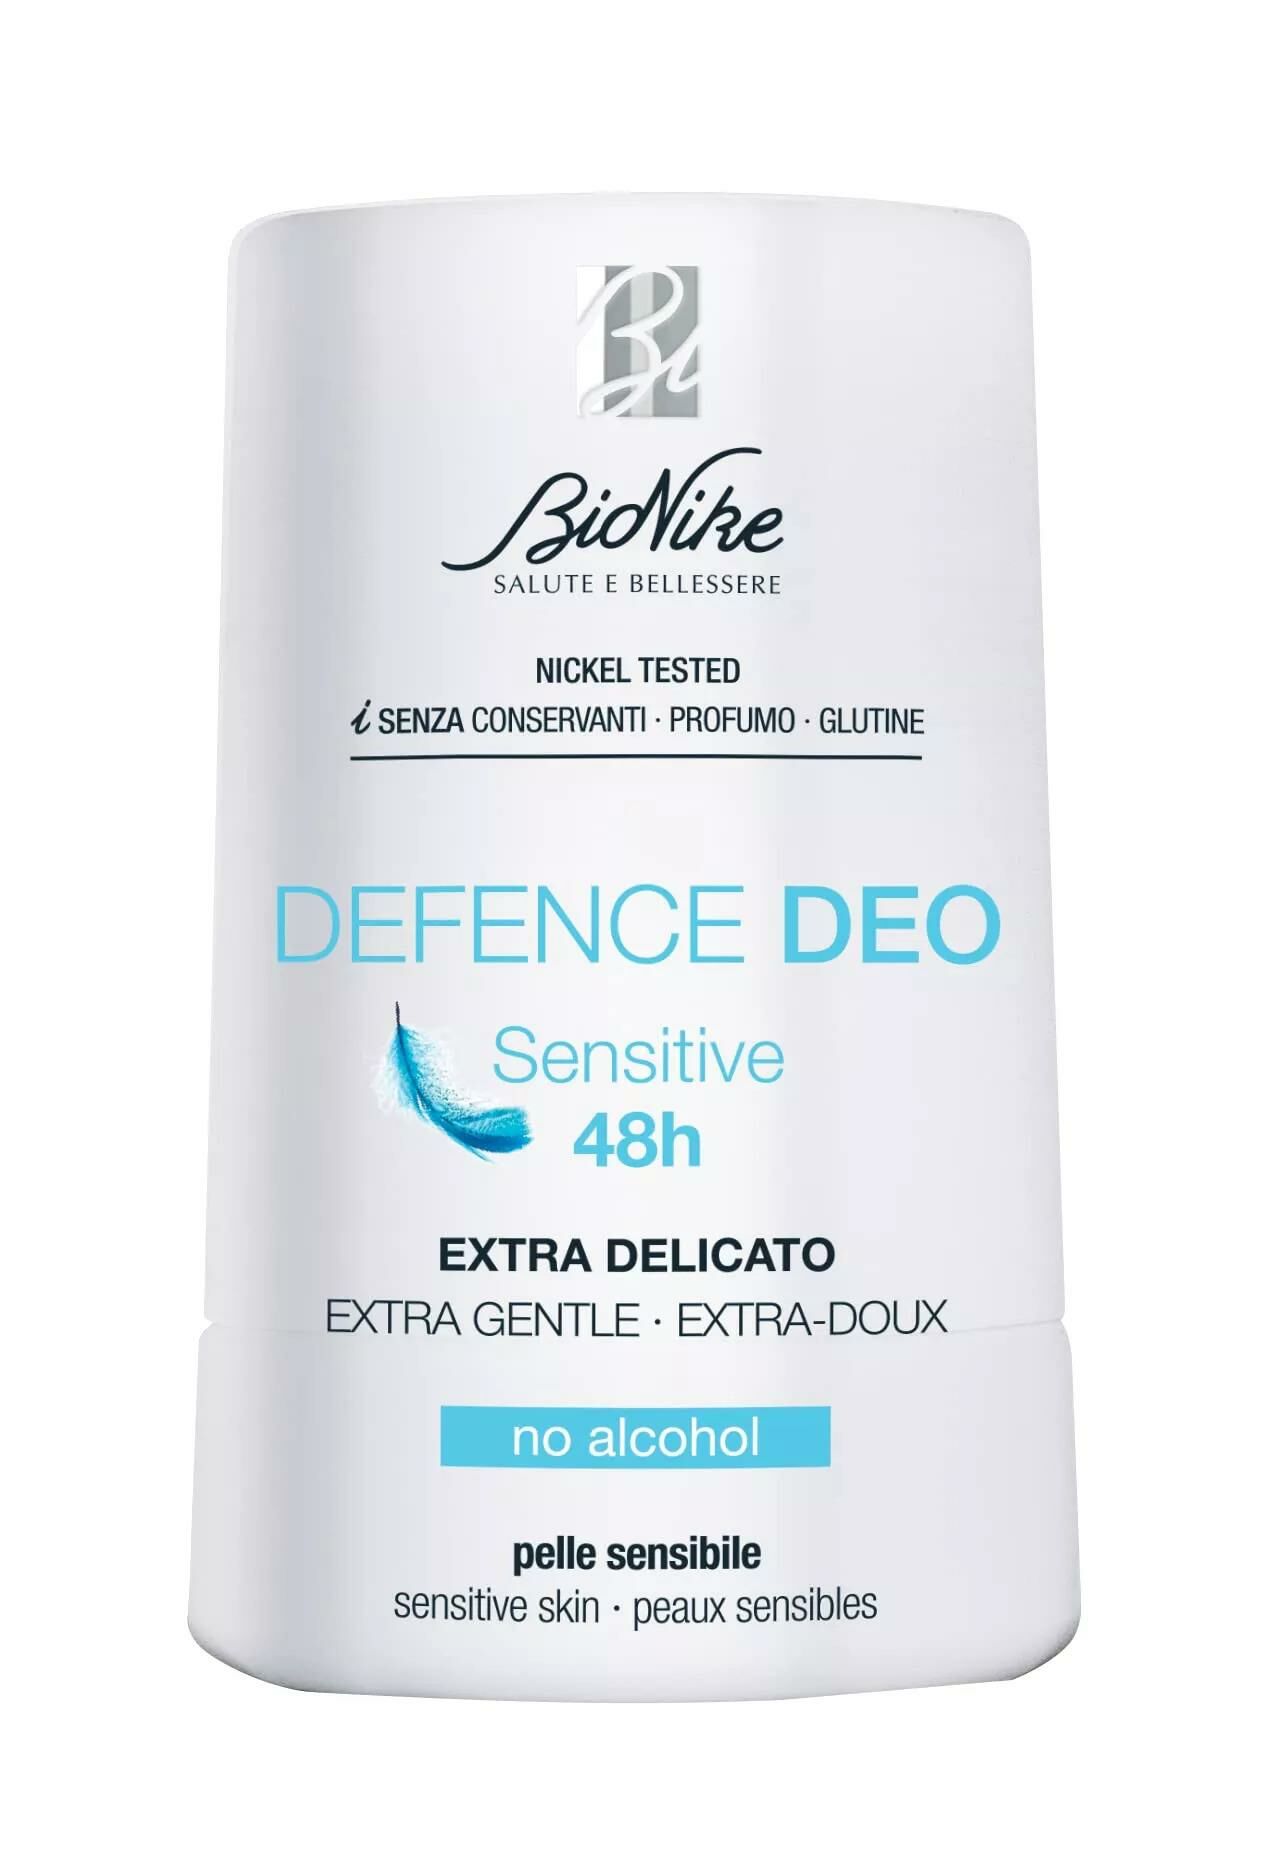 Bionike Defence Deo Sensitive 48h Latte Roll-on 50 ml